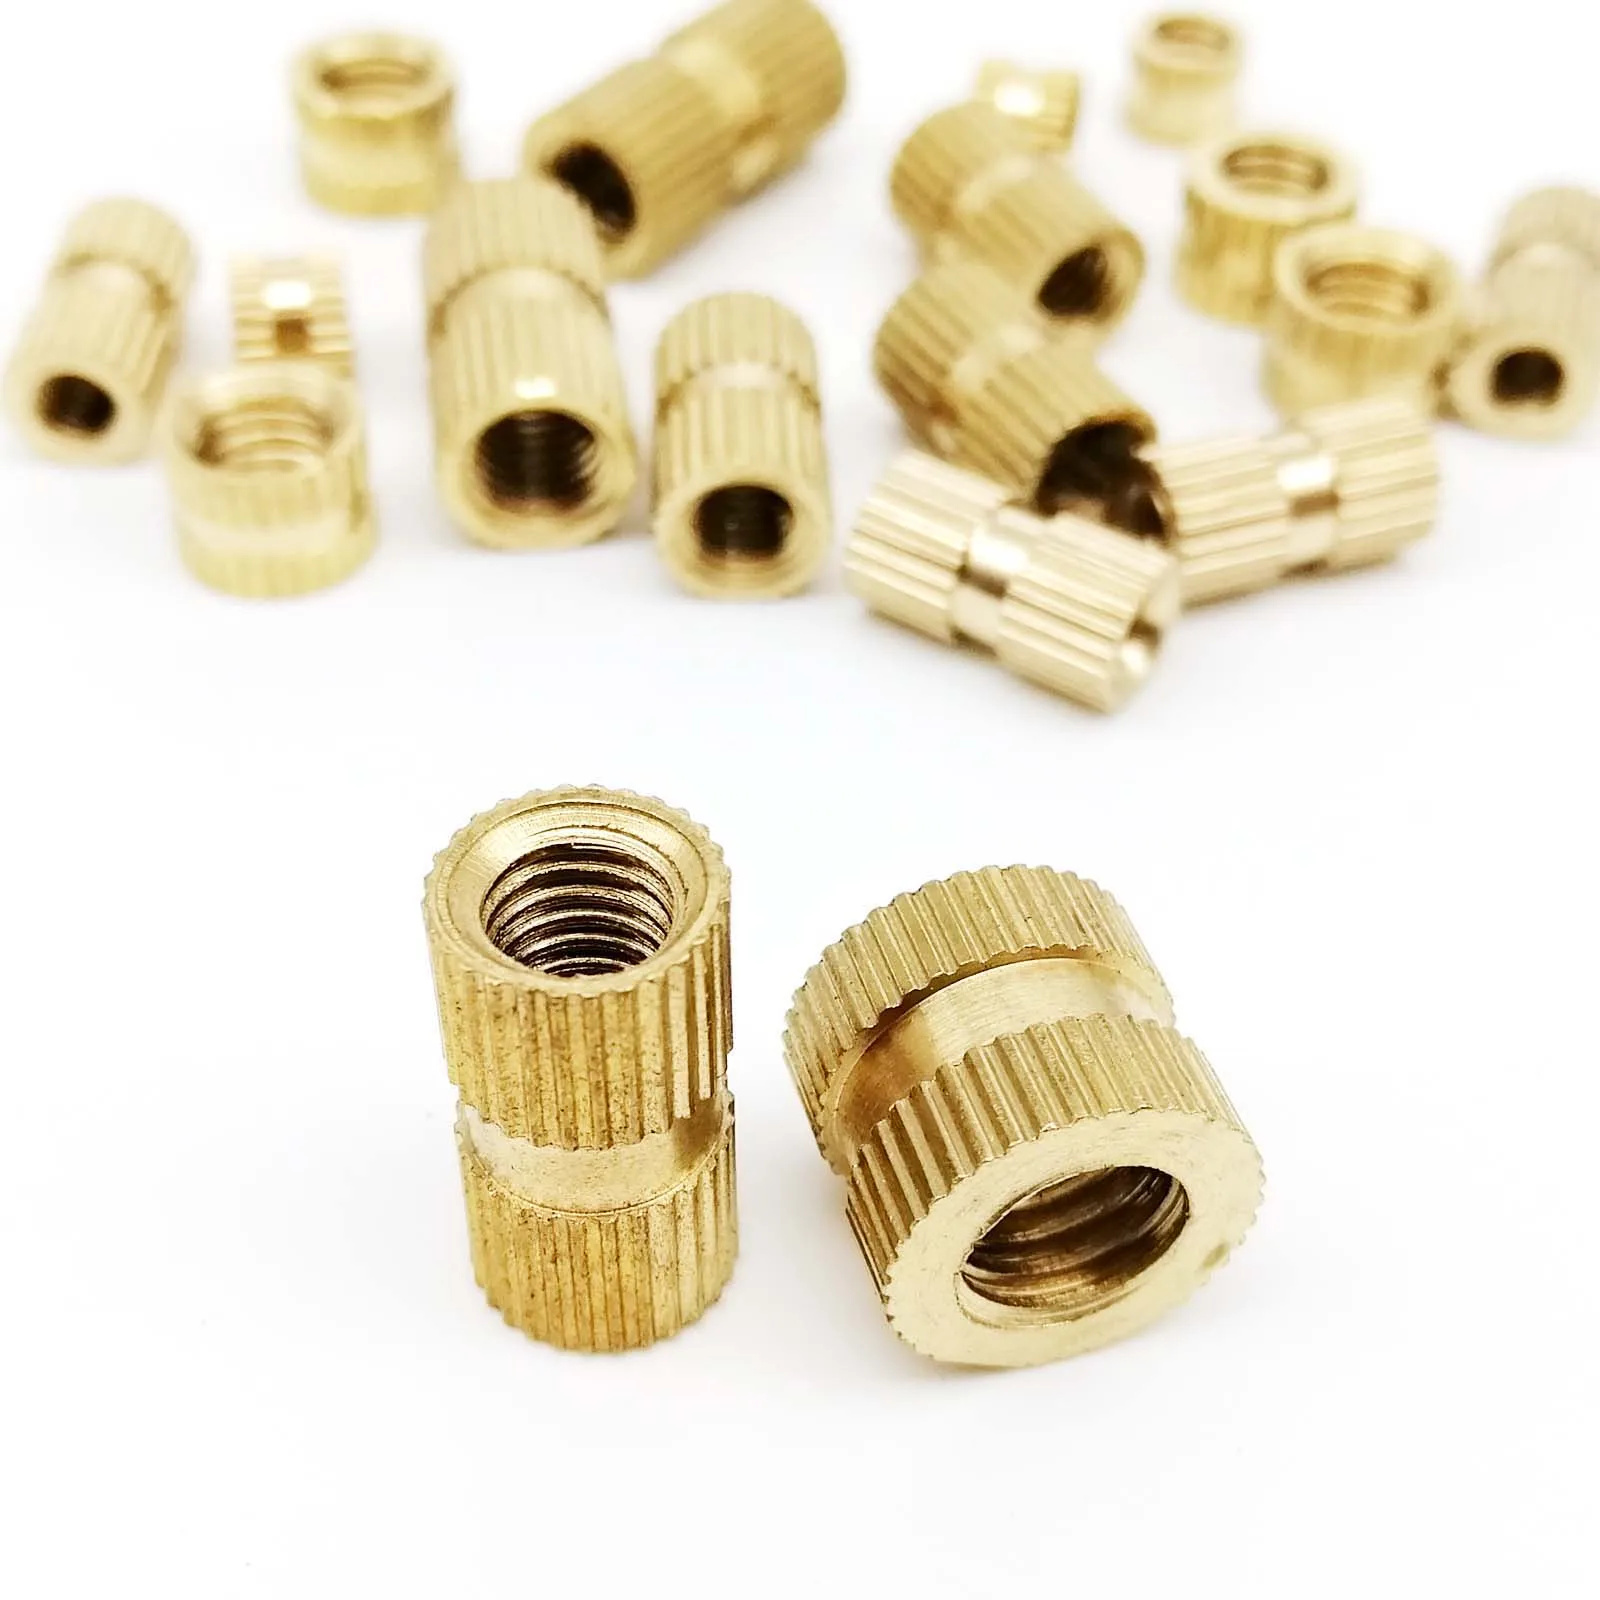 M2 M2.5 M3 M4 M5 M6 M8 Solid Brass Injection Molding Knurled Thread Inserts Nuts 